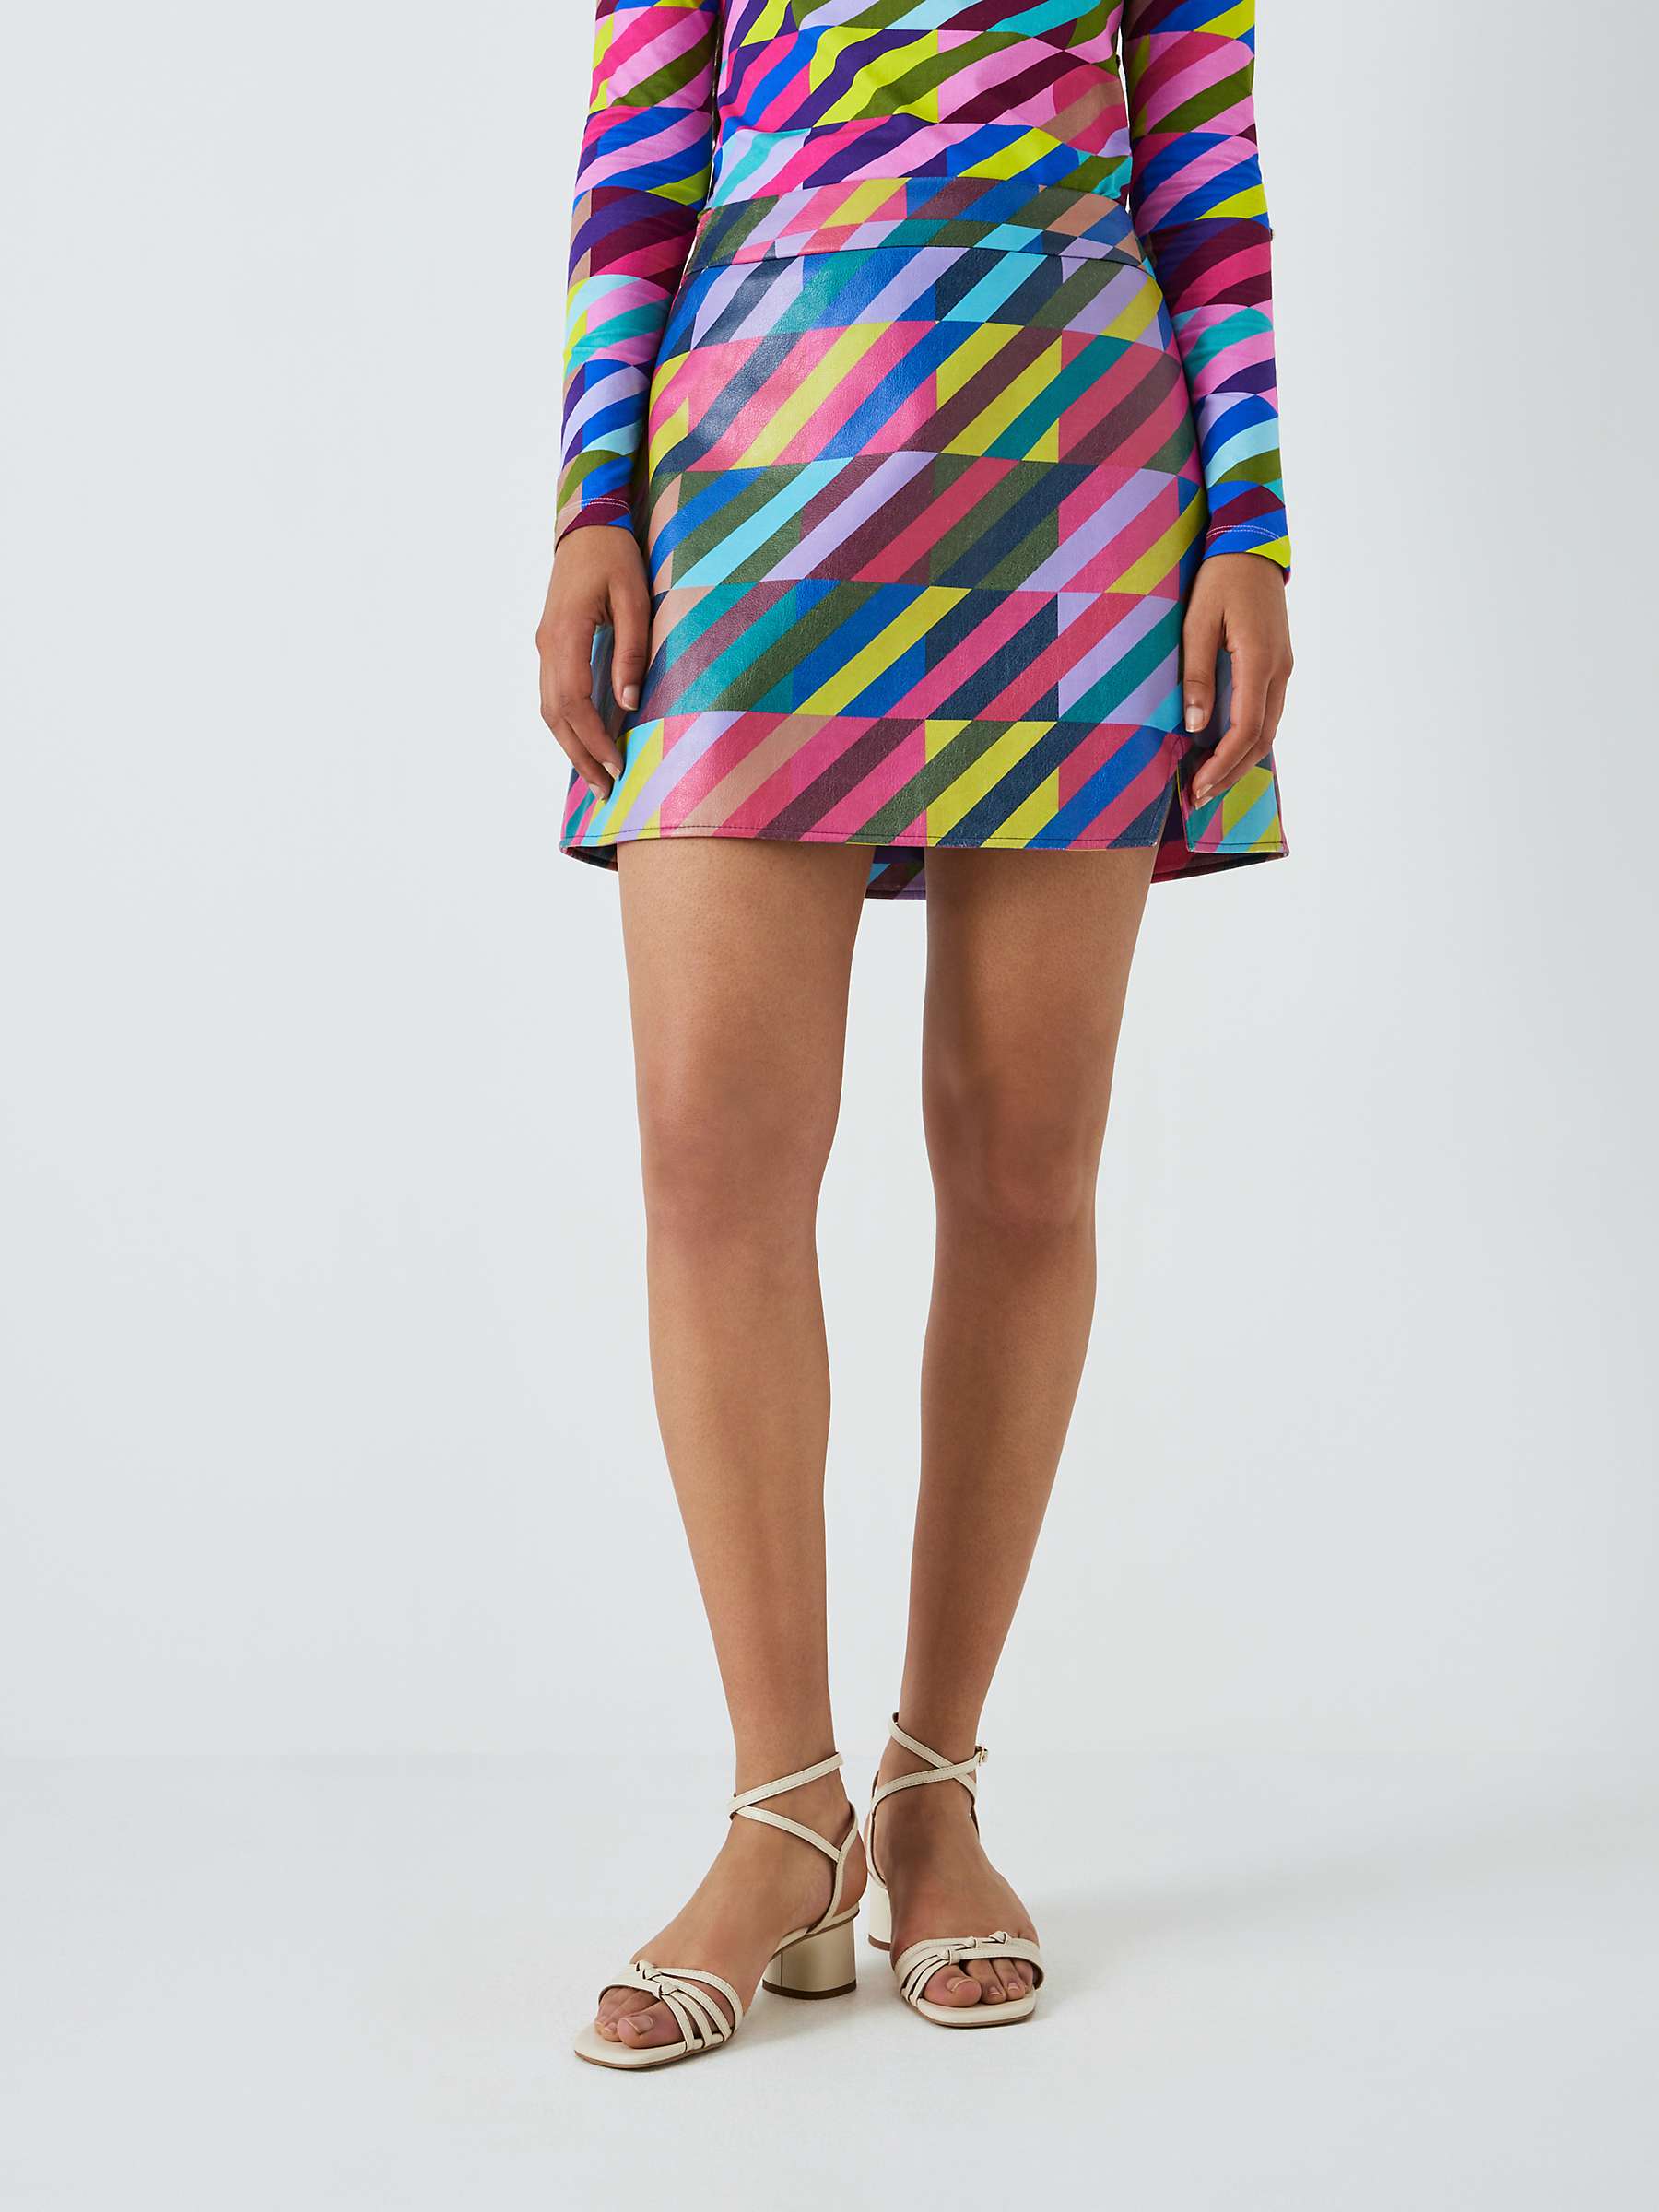 Buy Olivia Rubin Laurie Faux Leather Check Mini Skirt, Multi Online at johnlewis.com